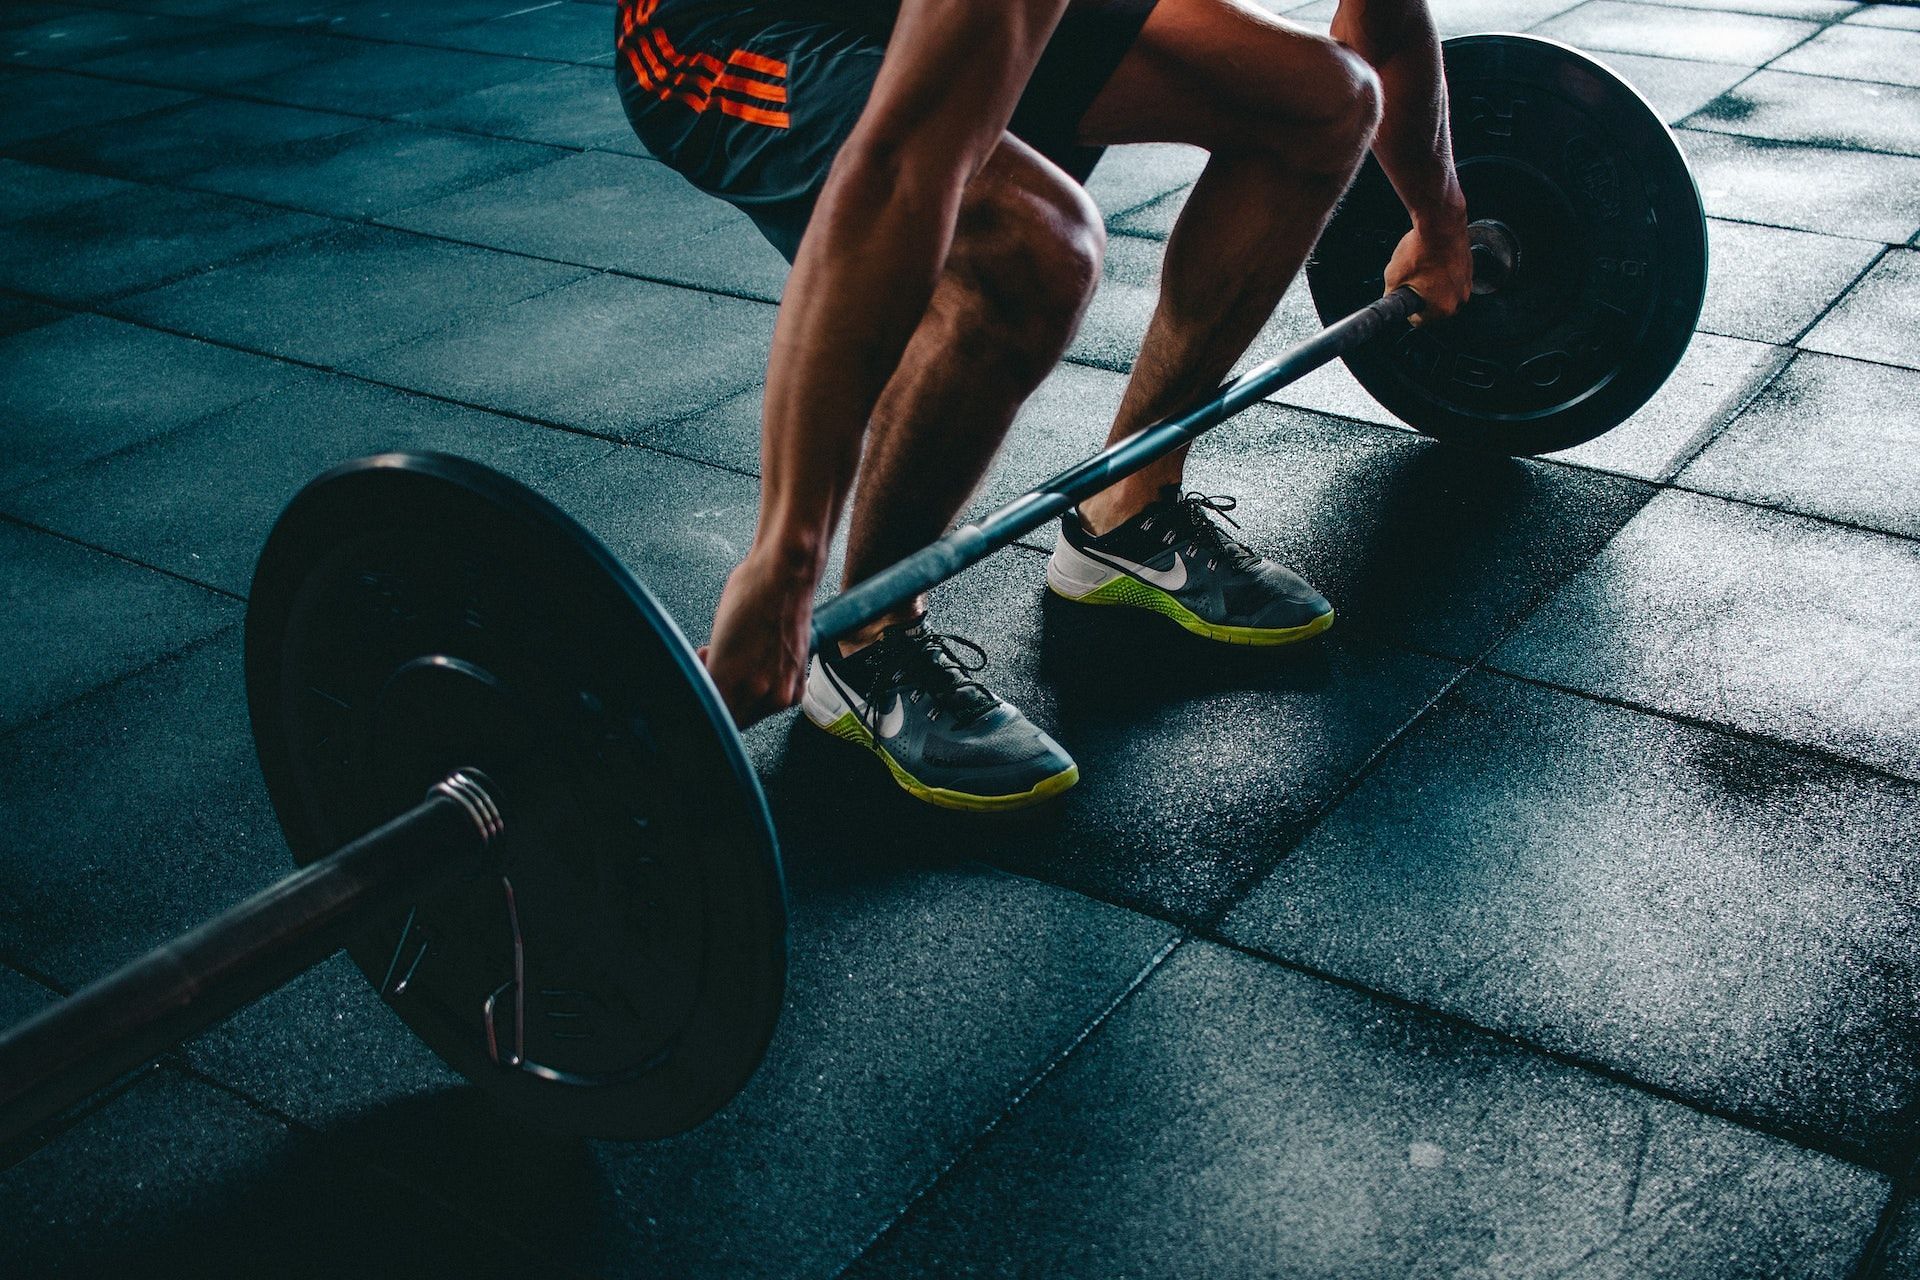 Deadlifts are one of the best full-body gym workouts. (Photo via Pexels/Victor Freitas)